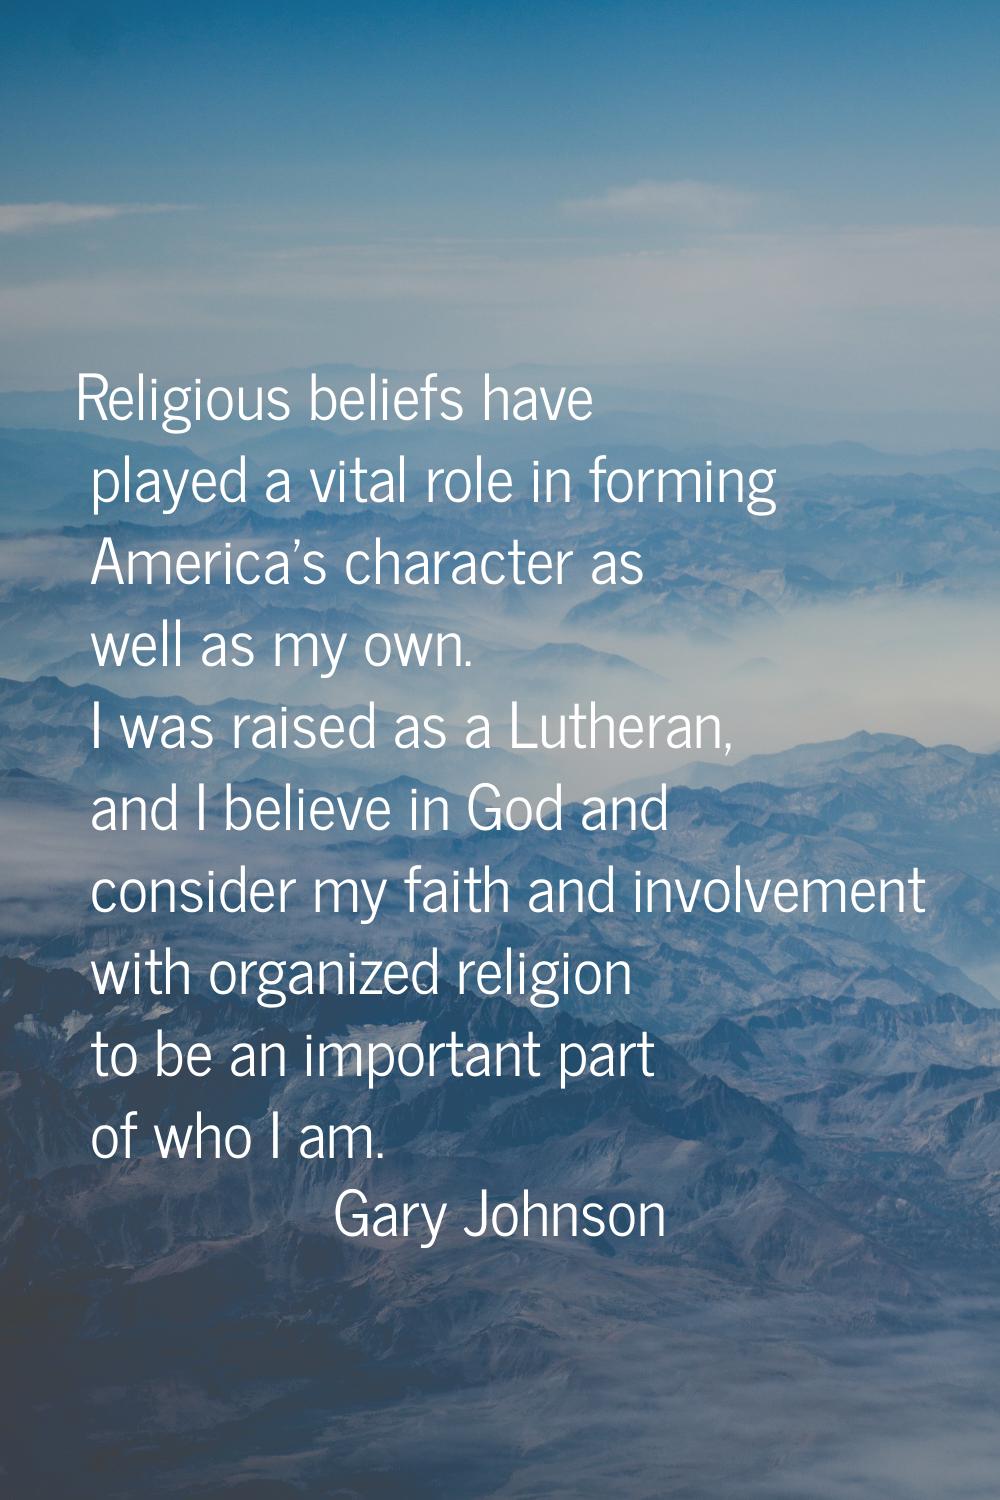 Religious beliefs have played a vital role in forming America's character as well as my own. I was 